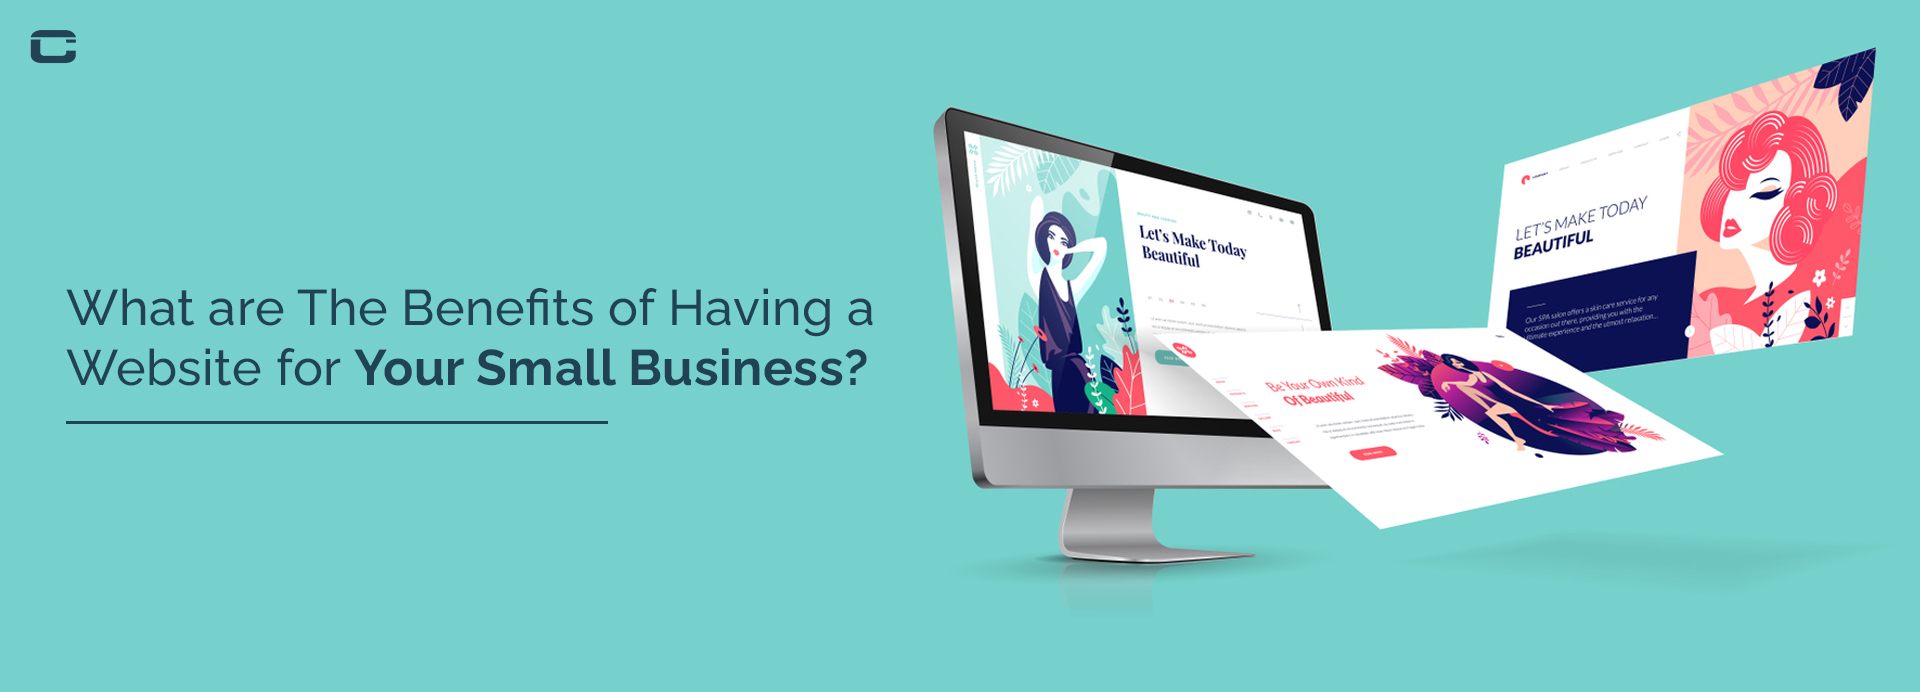 What are the Benefits of Having a Website for Your Small Business?